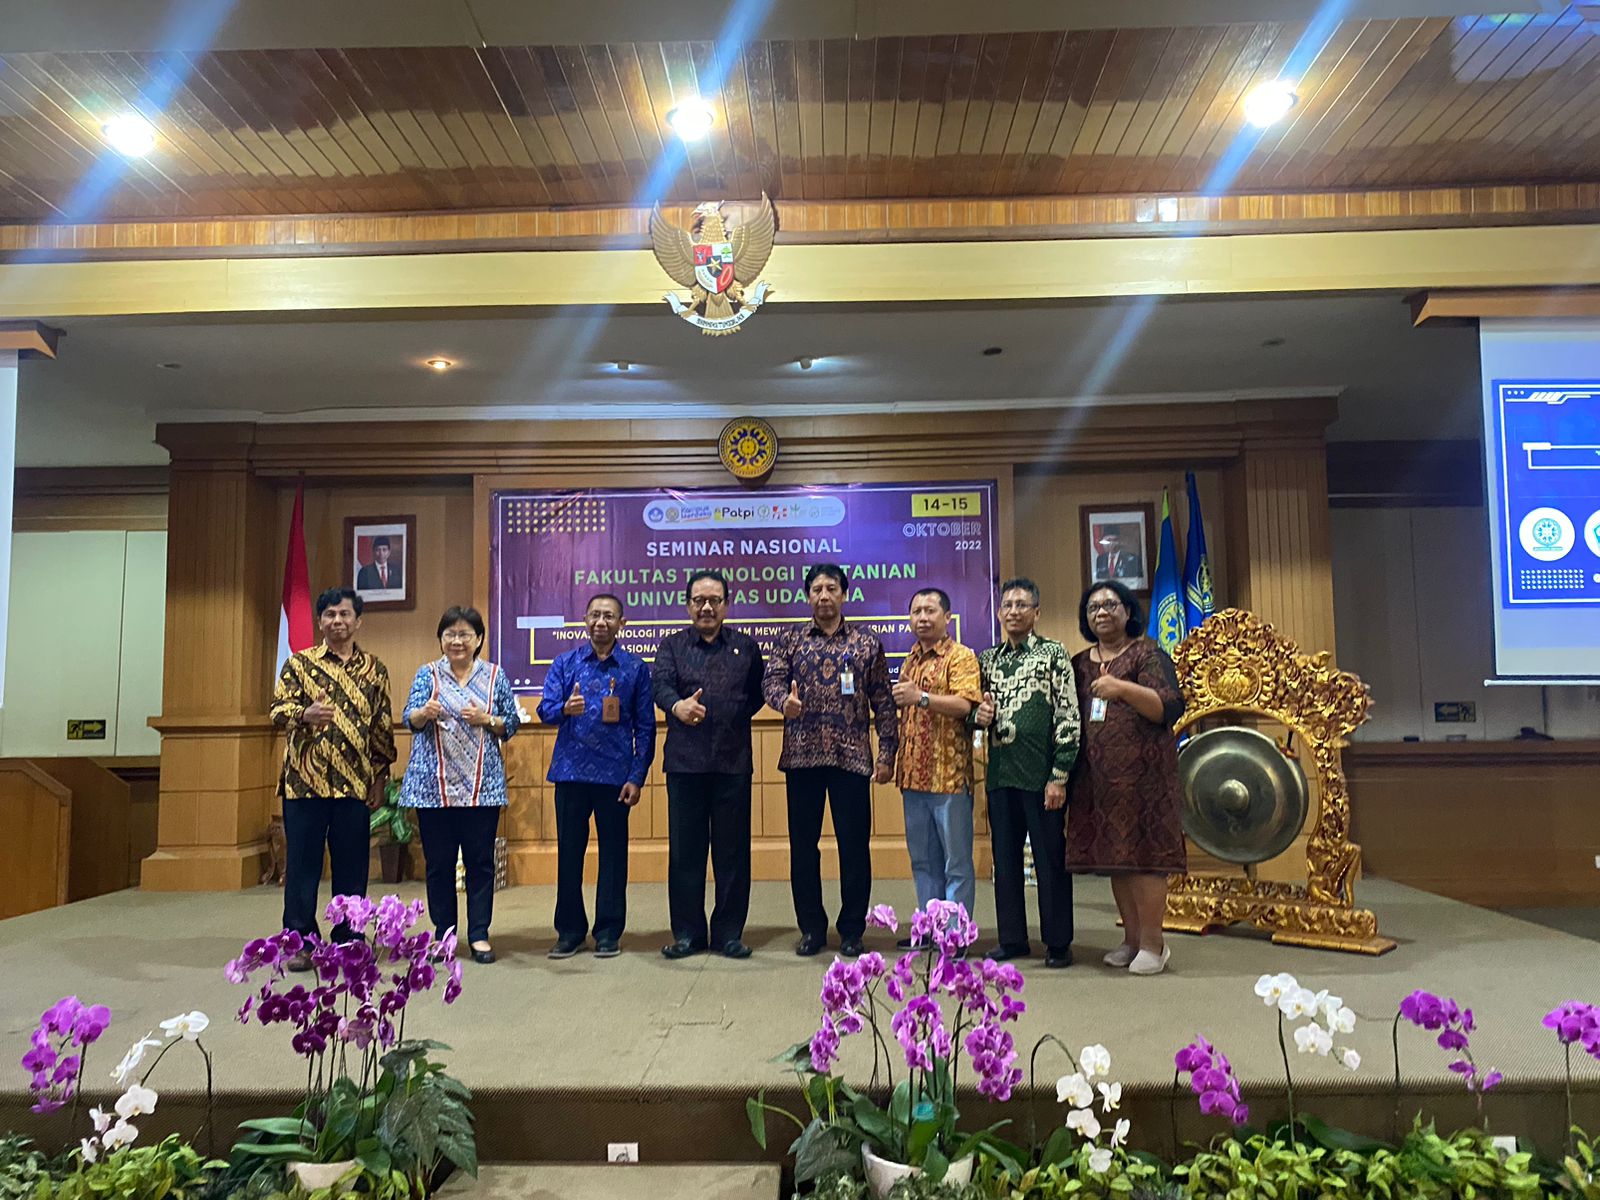 FTP Udayana Holds First Offline National Seminar After the Pandemic, Presents the Deputy Governor of Bali as Keynote Speaker